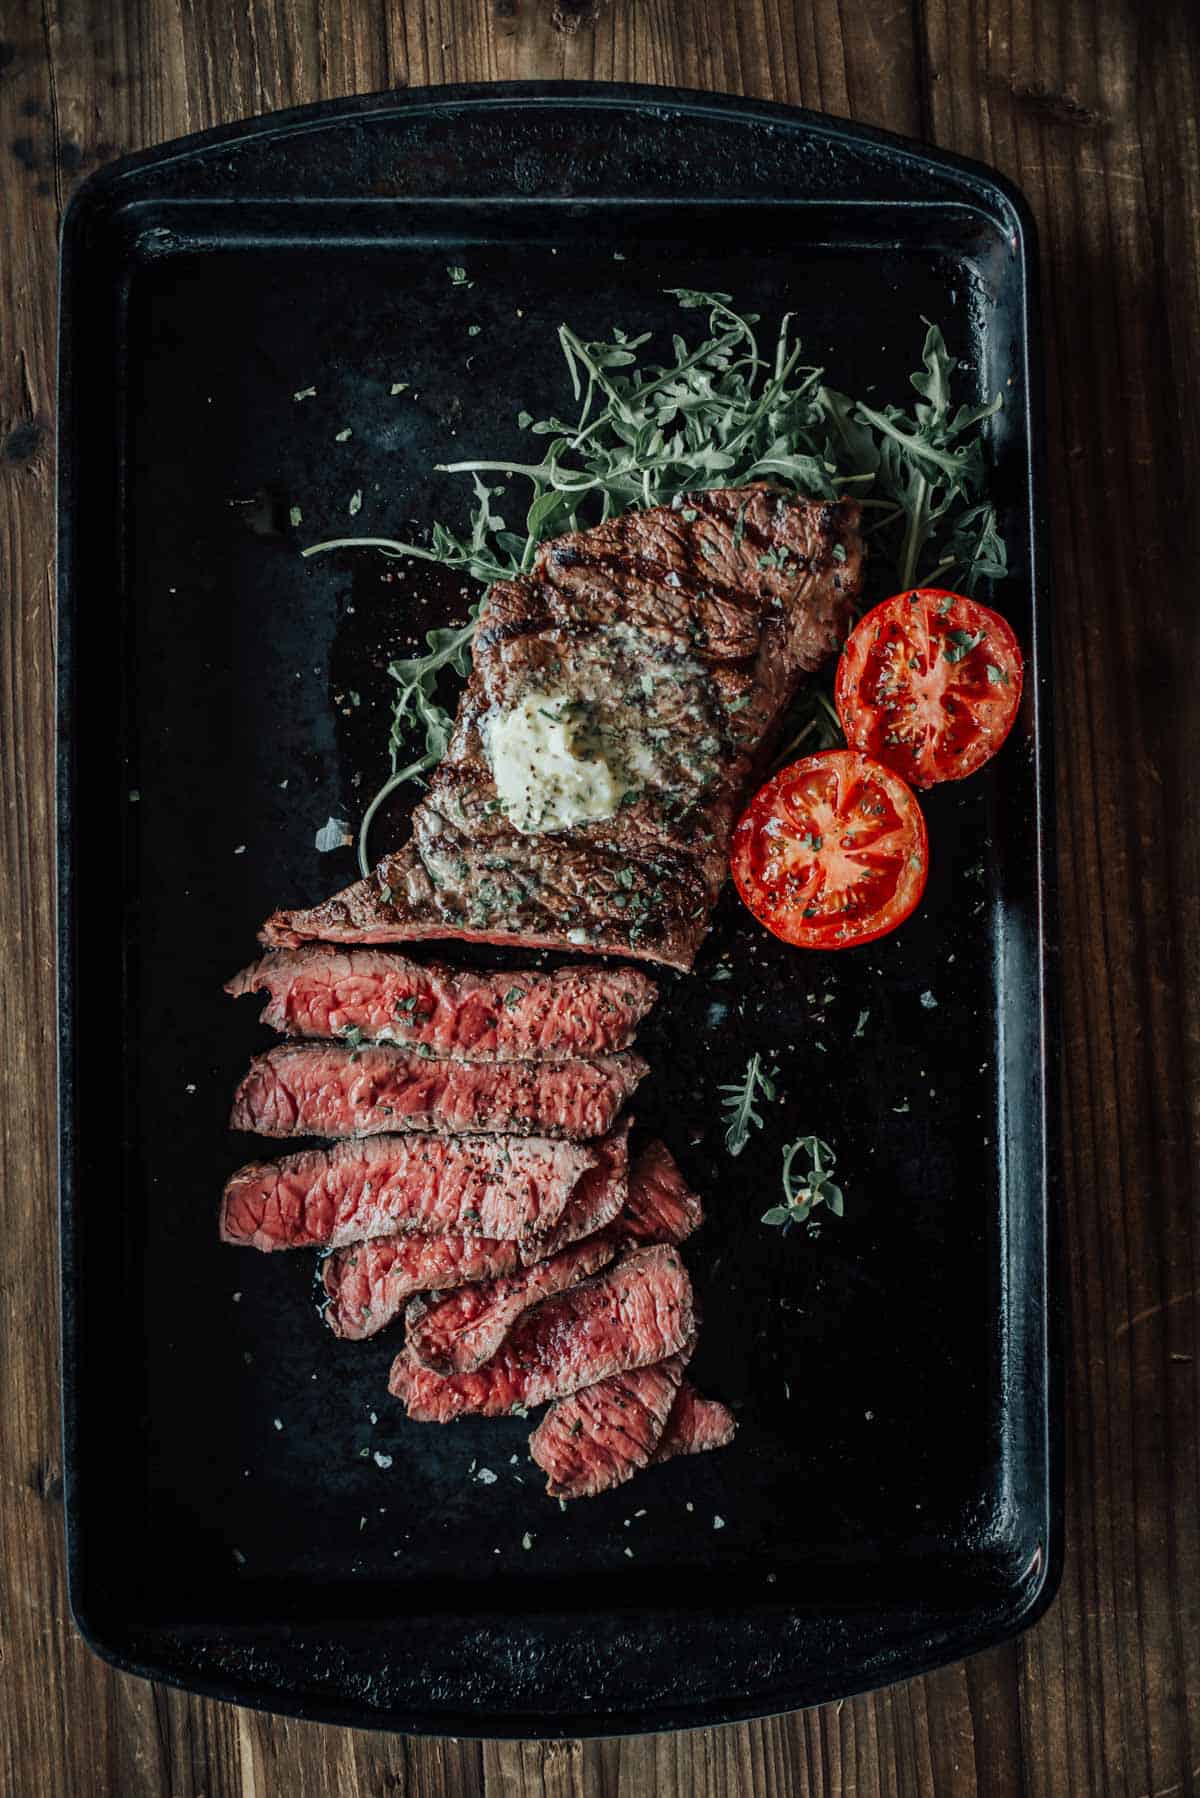 A grilled london broil, sliced and topped with a dollop of butter, is served on a black tray with halved grilled tomatoes and a bed of arugula.